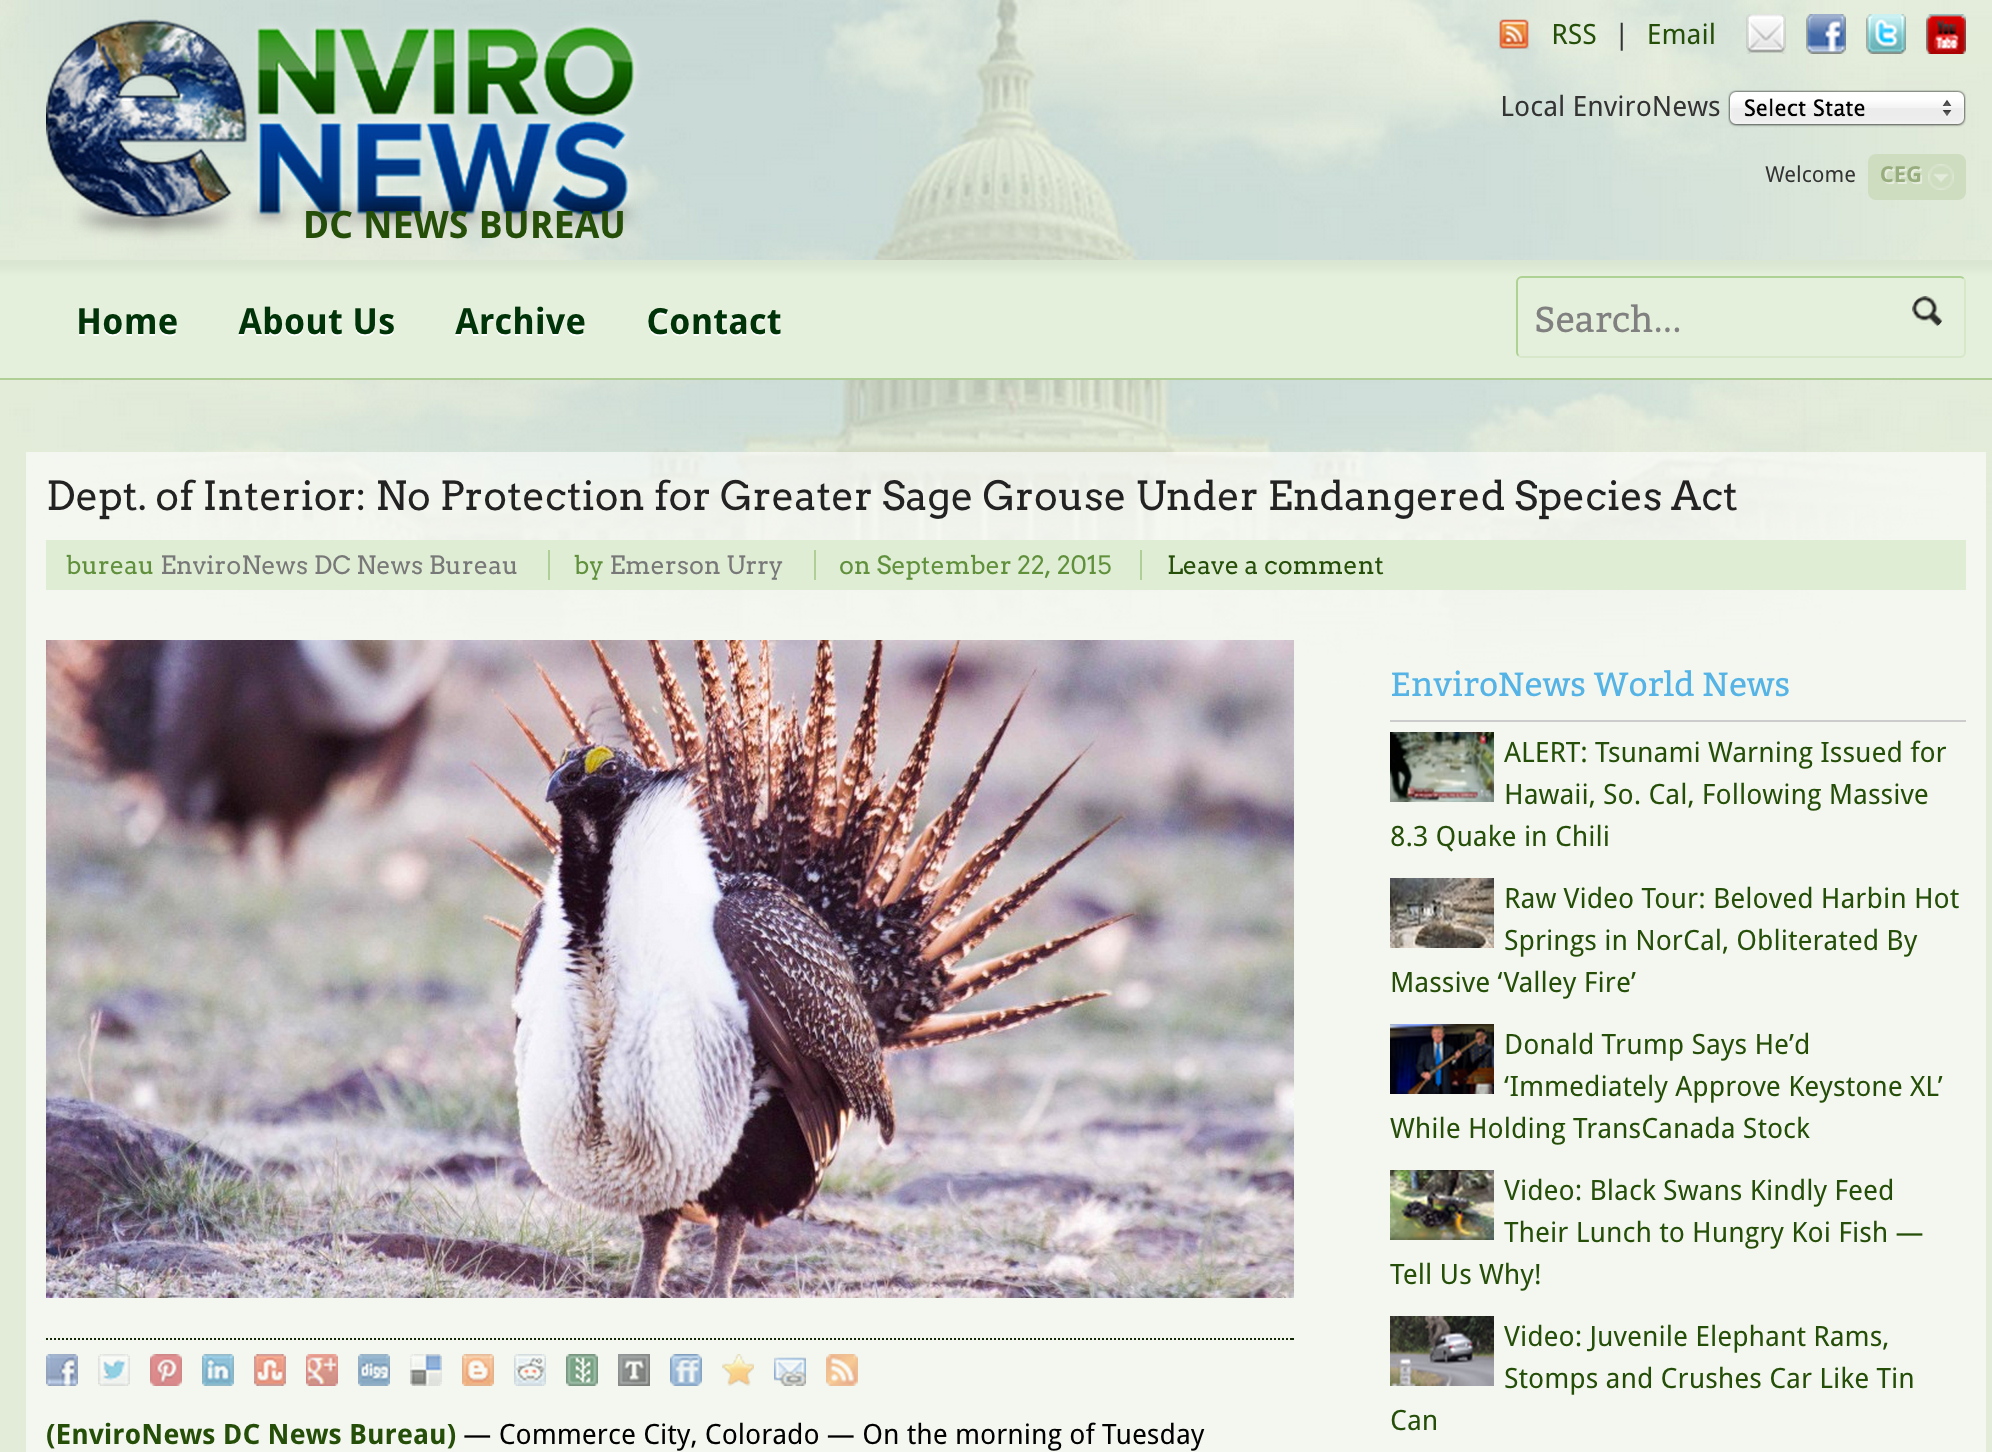 EnviroNews Headline: Dept. of Interior: No Protection for Greater Sage Grouse Under Endangered Species Act